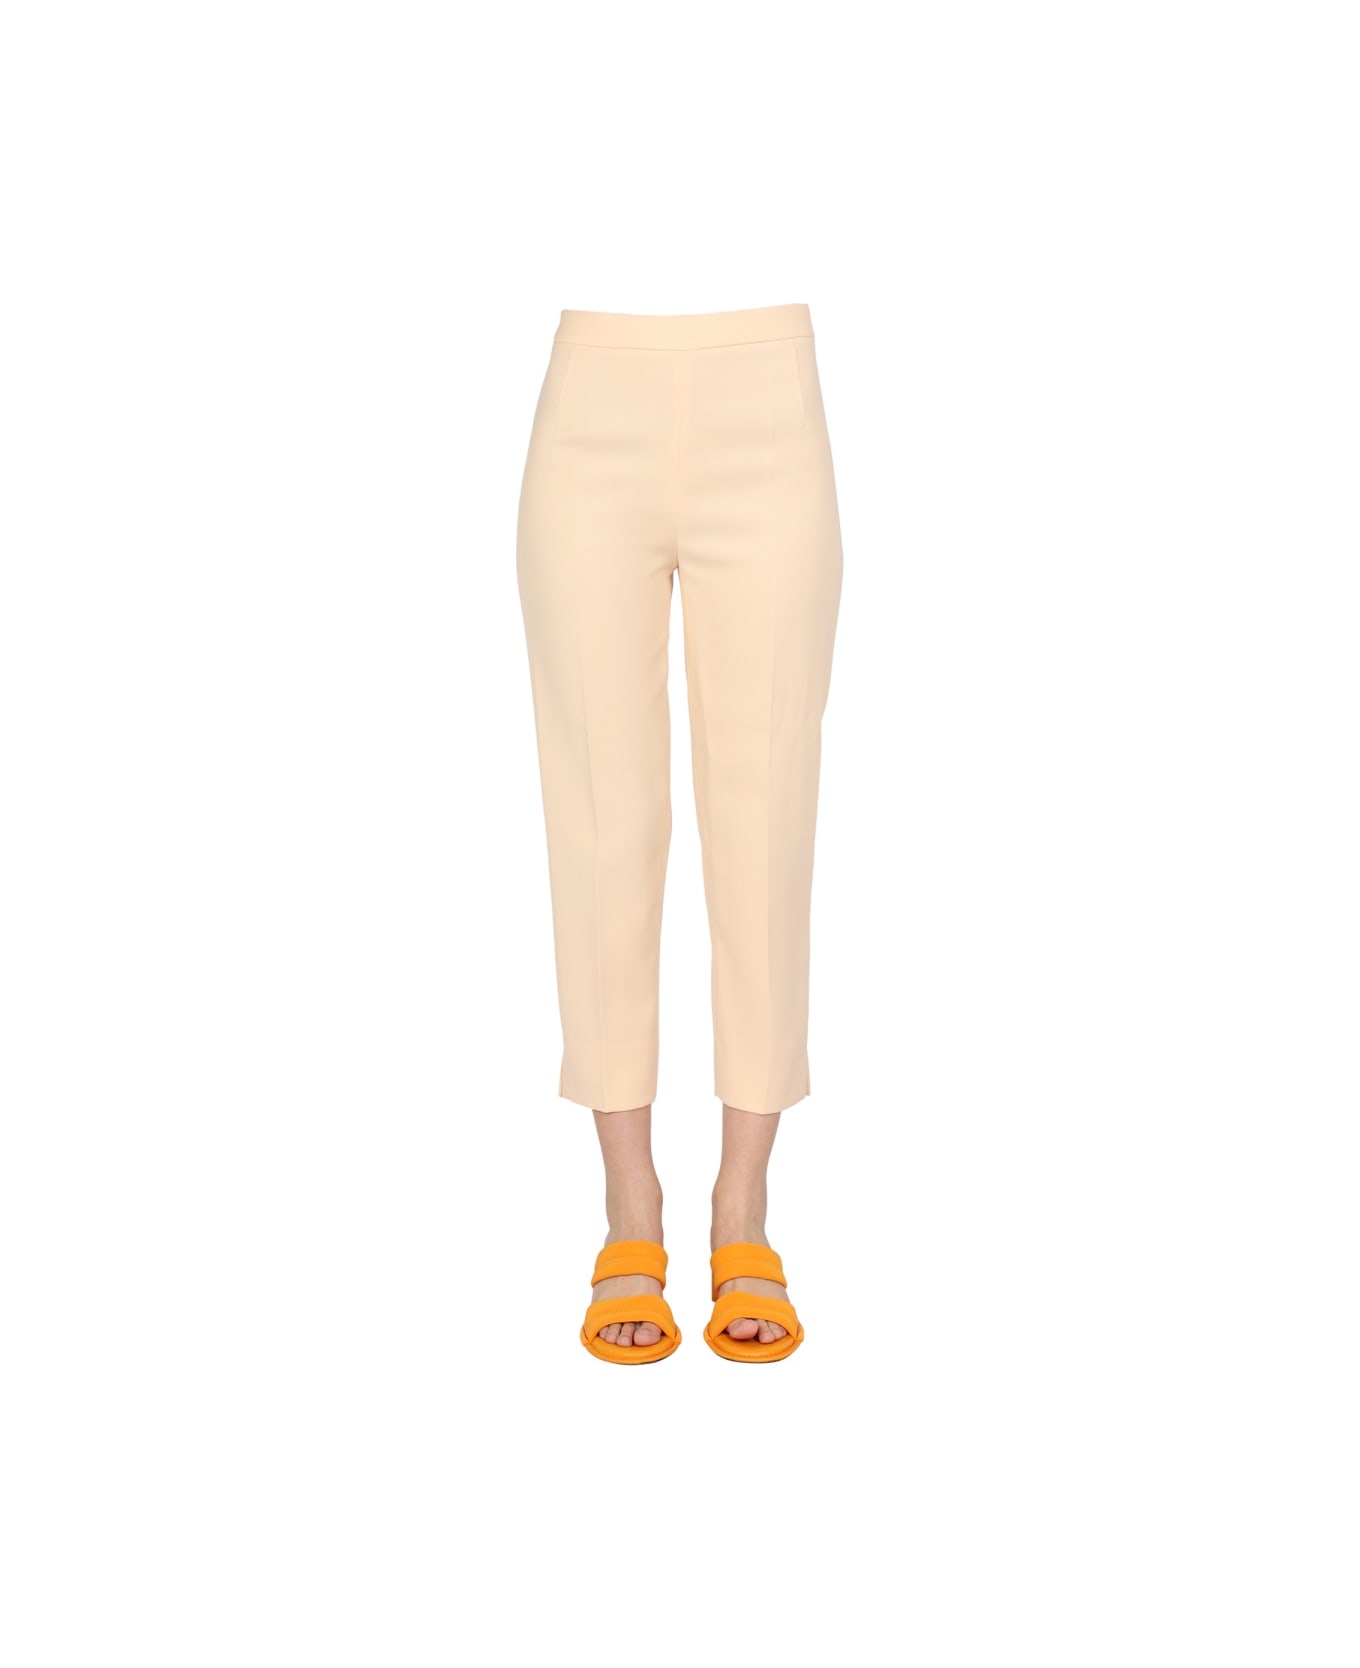 Boutique Moschino Cady Pants - IVORY